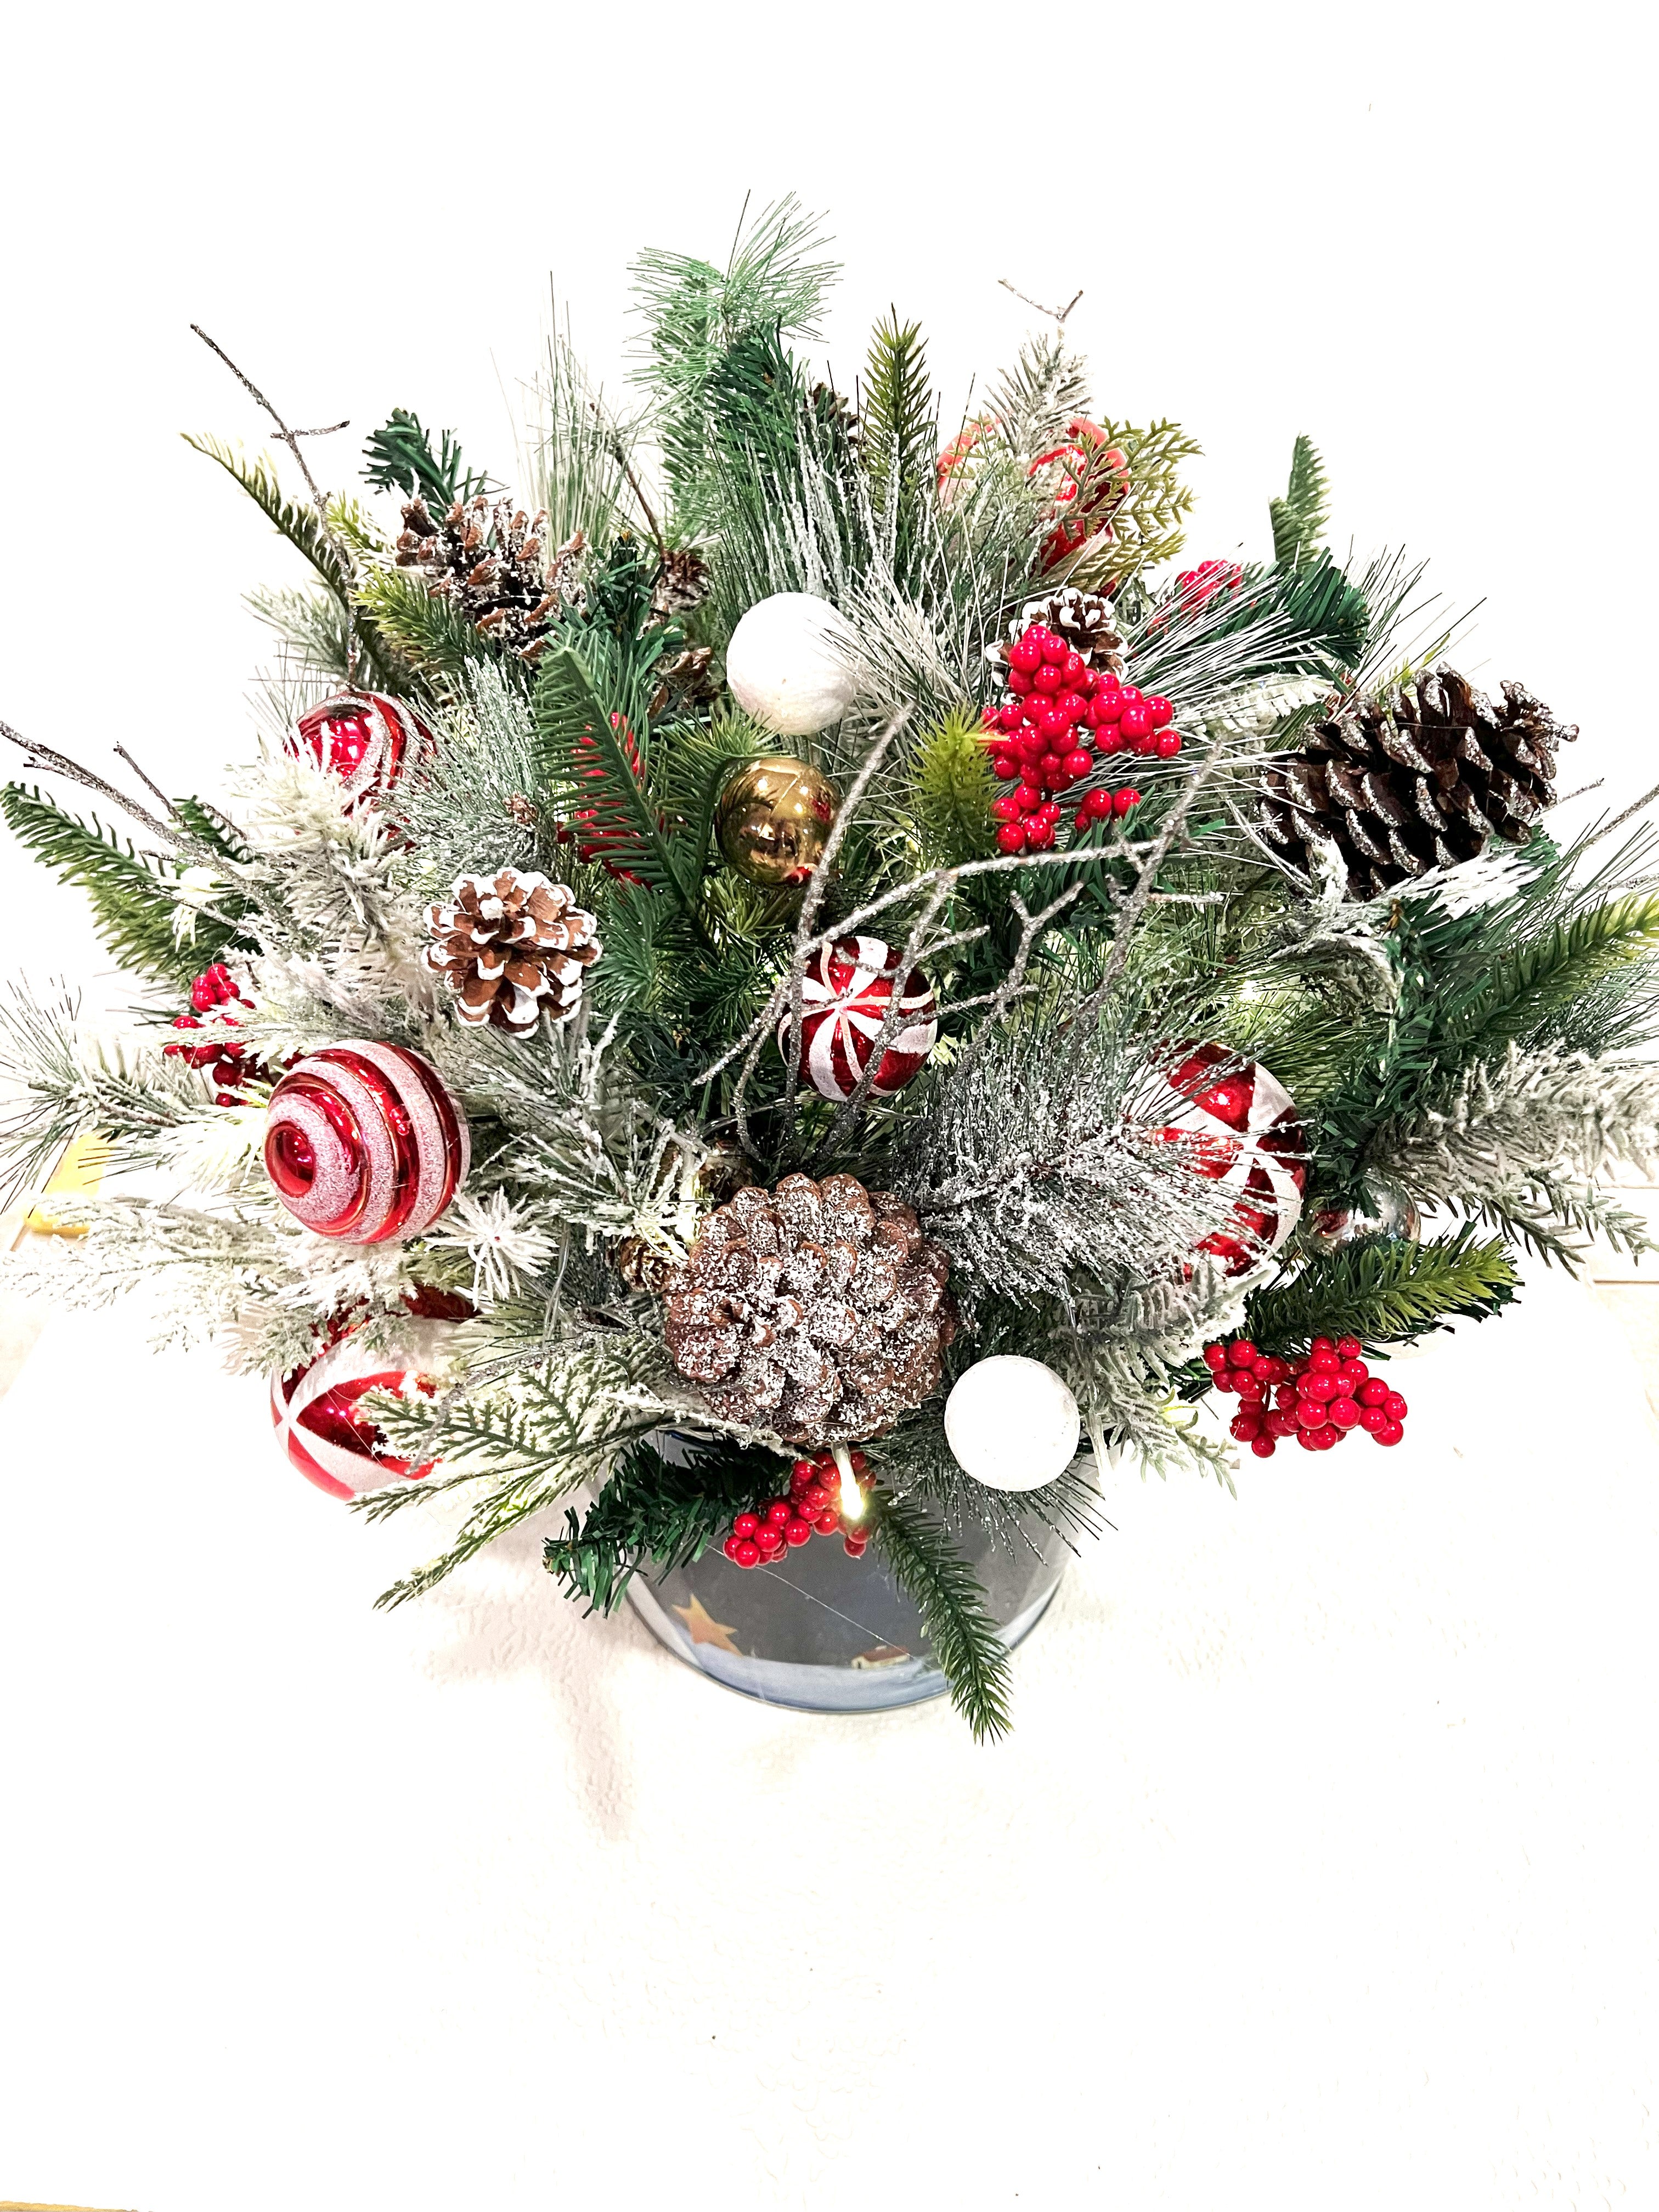 Frosted LED Lights-Pinecone & Berry Christmas-23" H X 23" W LED Light-Up